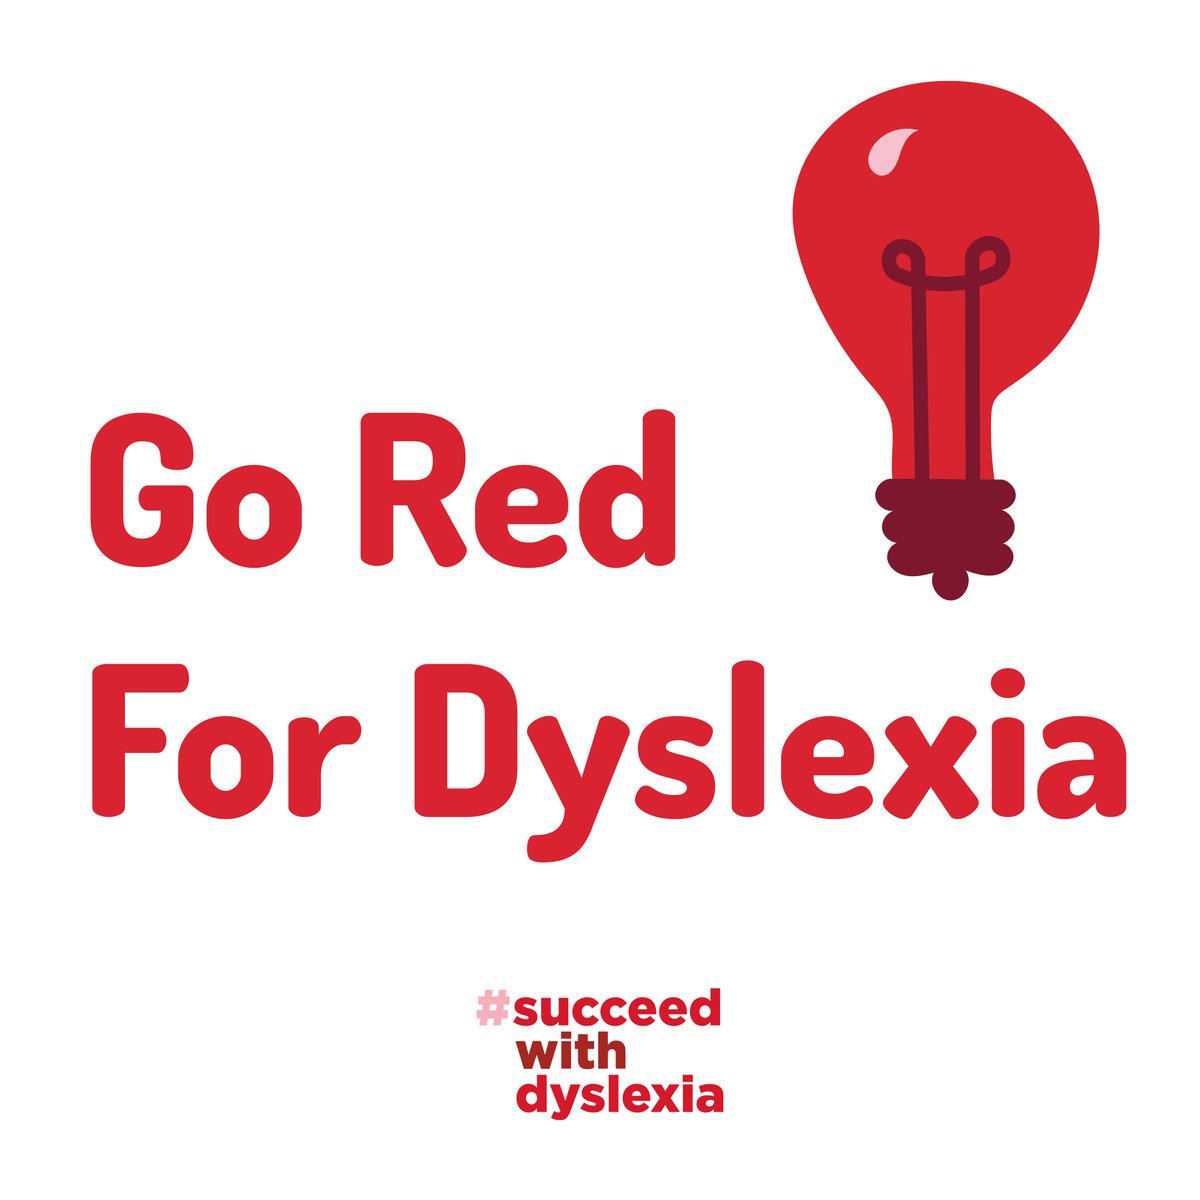 It's official! #GoRedForDyslexia has begun! 🎉❤️
Get ready for a month packed with free resources, expert webinars, and inspiring stories. Watch this space! 👀 💥 #DyslexiaAwarenessMonth #DyslexiaSupport #Dyslexia